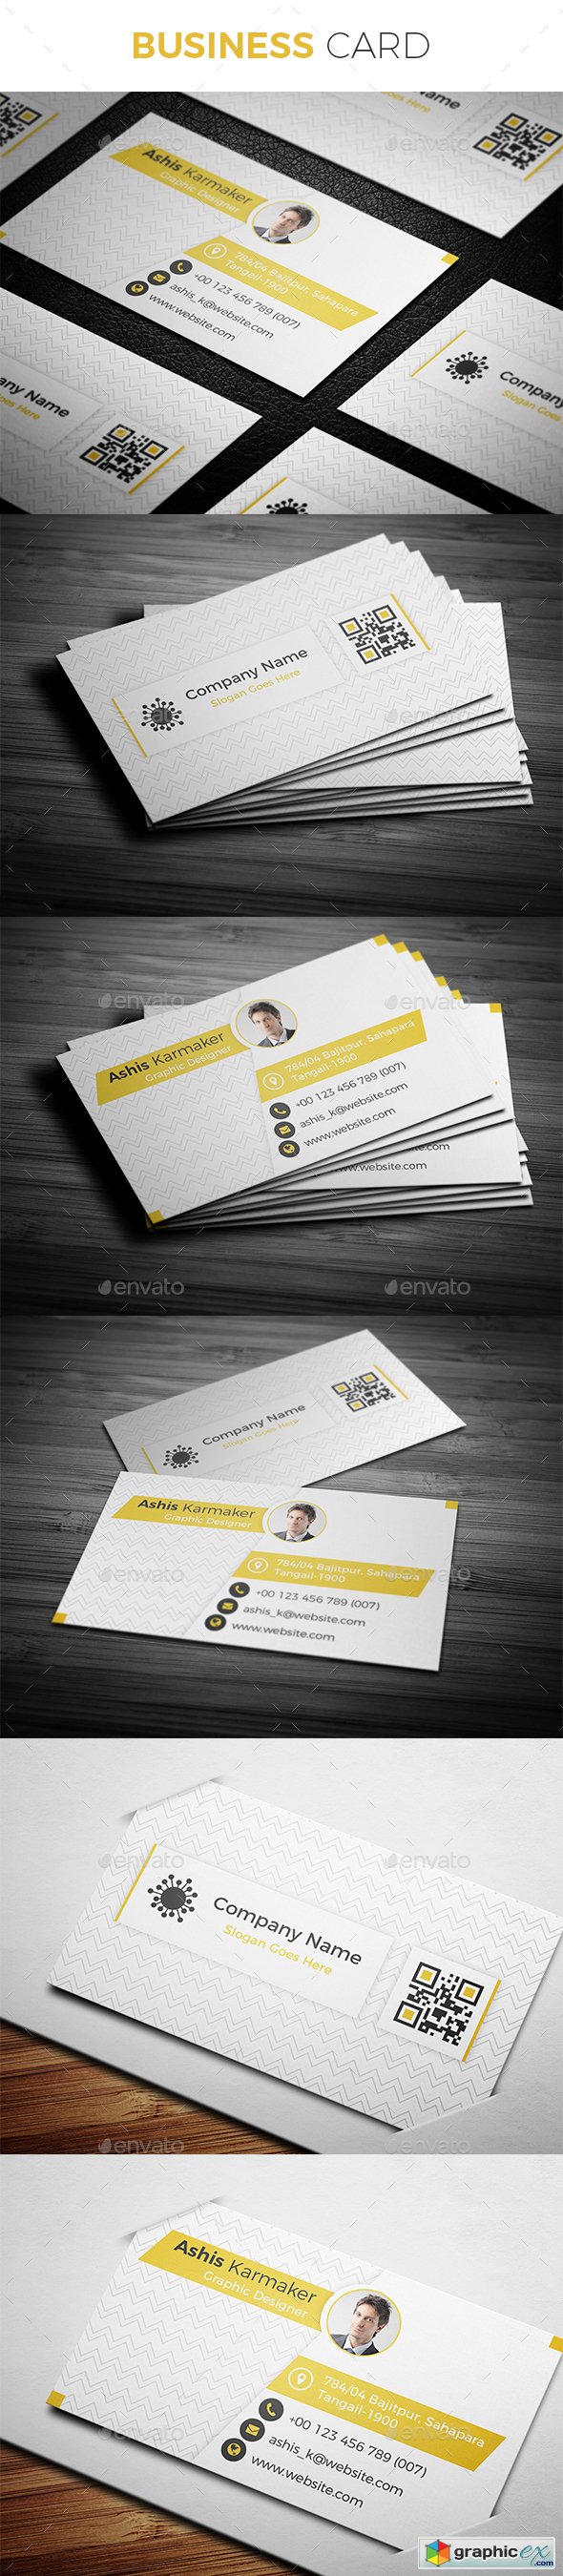 Business Card 19554585